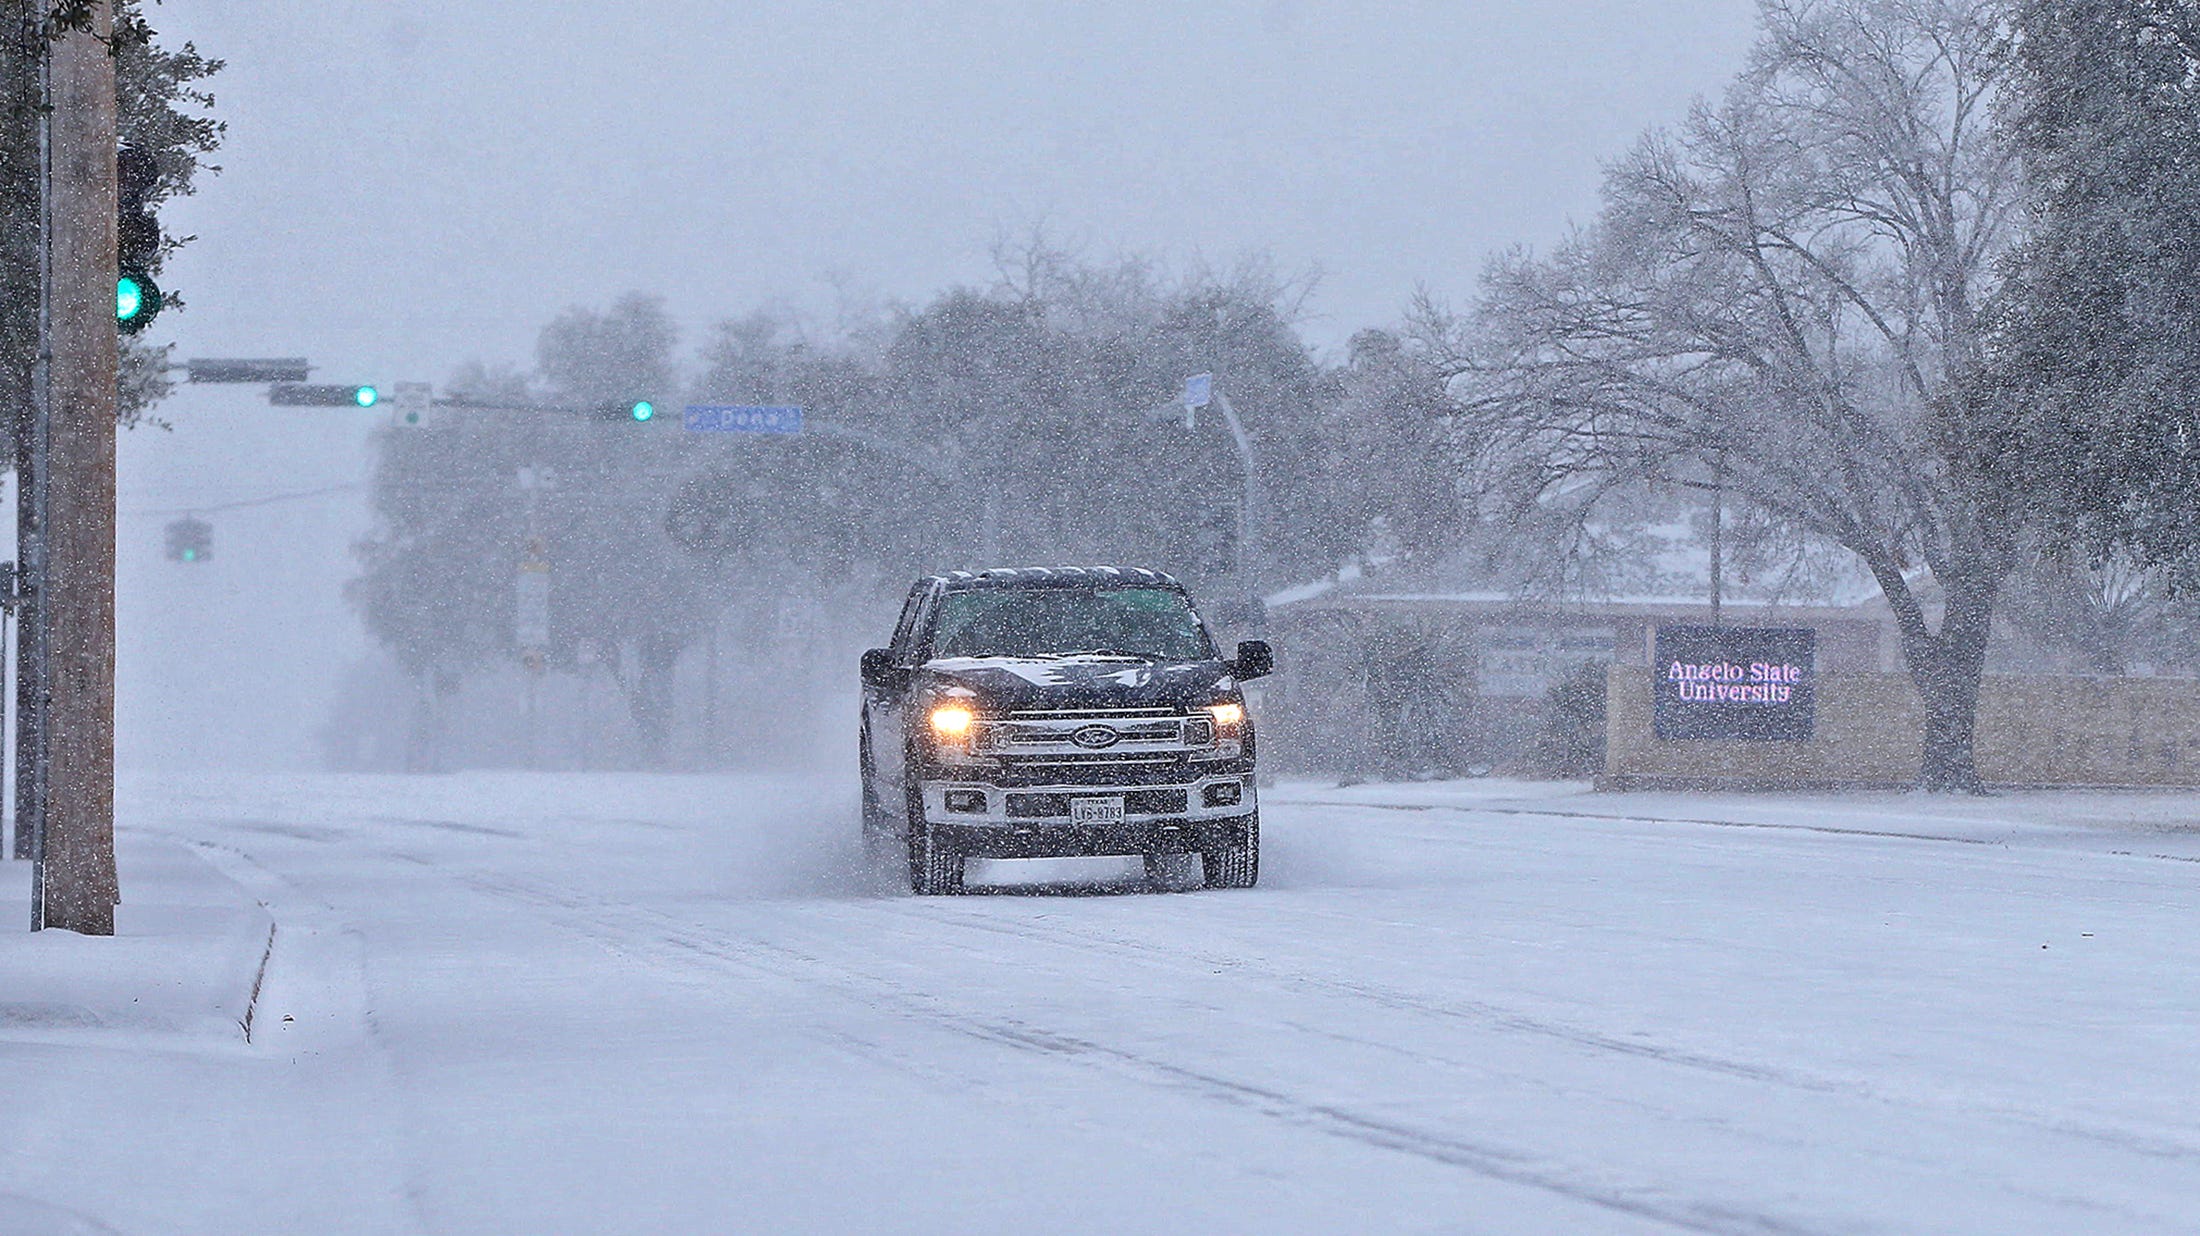 A vehicle drives through the snow near the Angelo State University campus on S. Johnson St. on Sunday, Feb. 14, 2021.